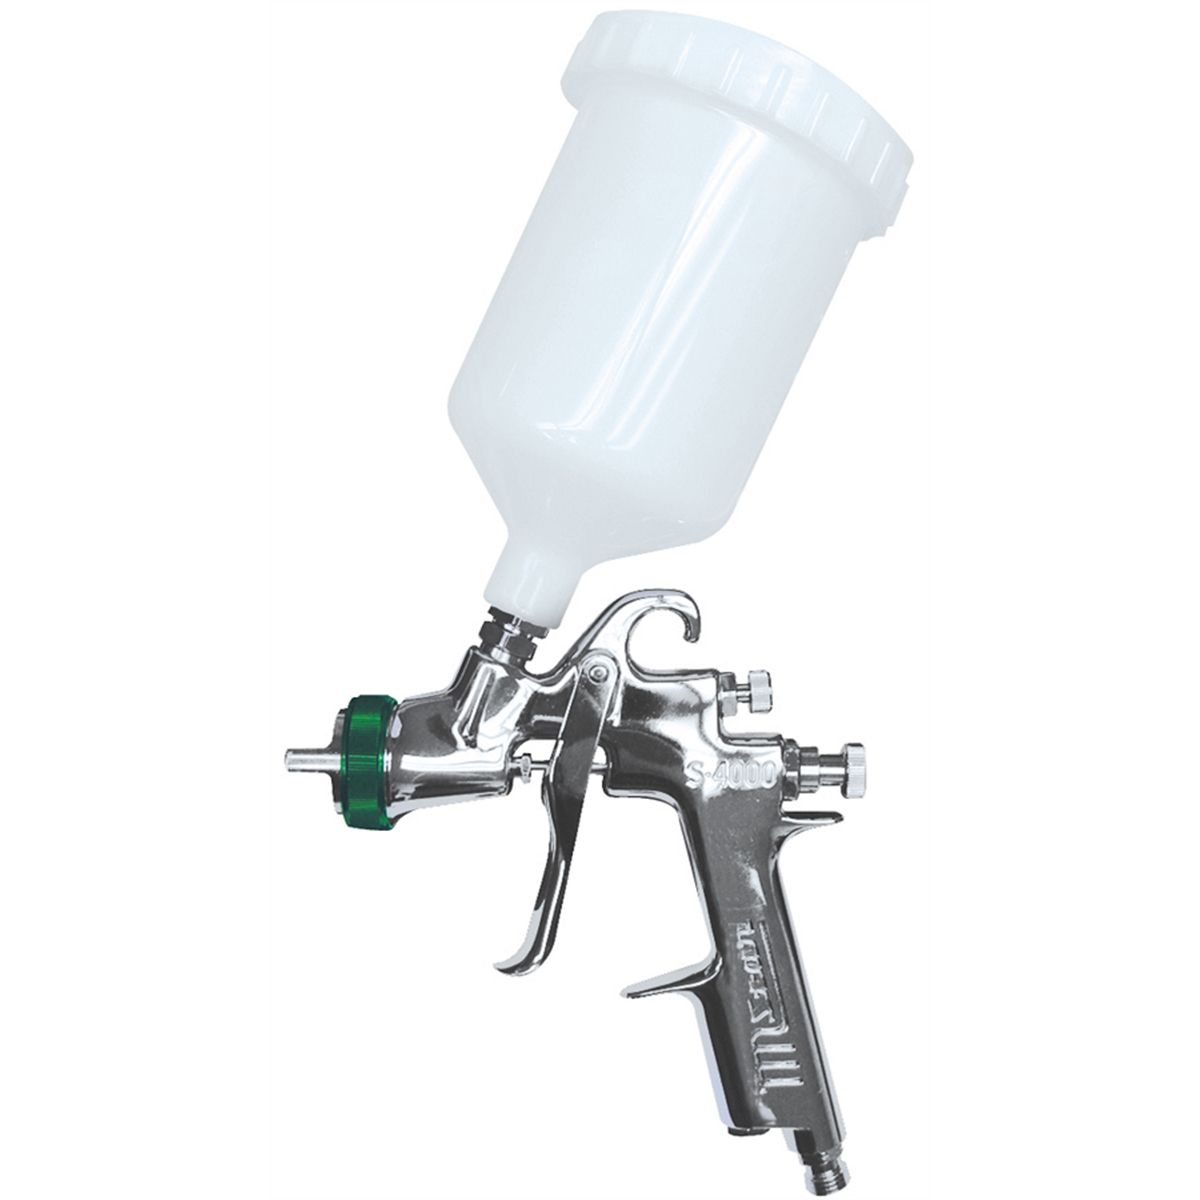 LVLP Gravity Feed Spray Gun with 1.8mm Nozzle - suitable for WAT